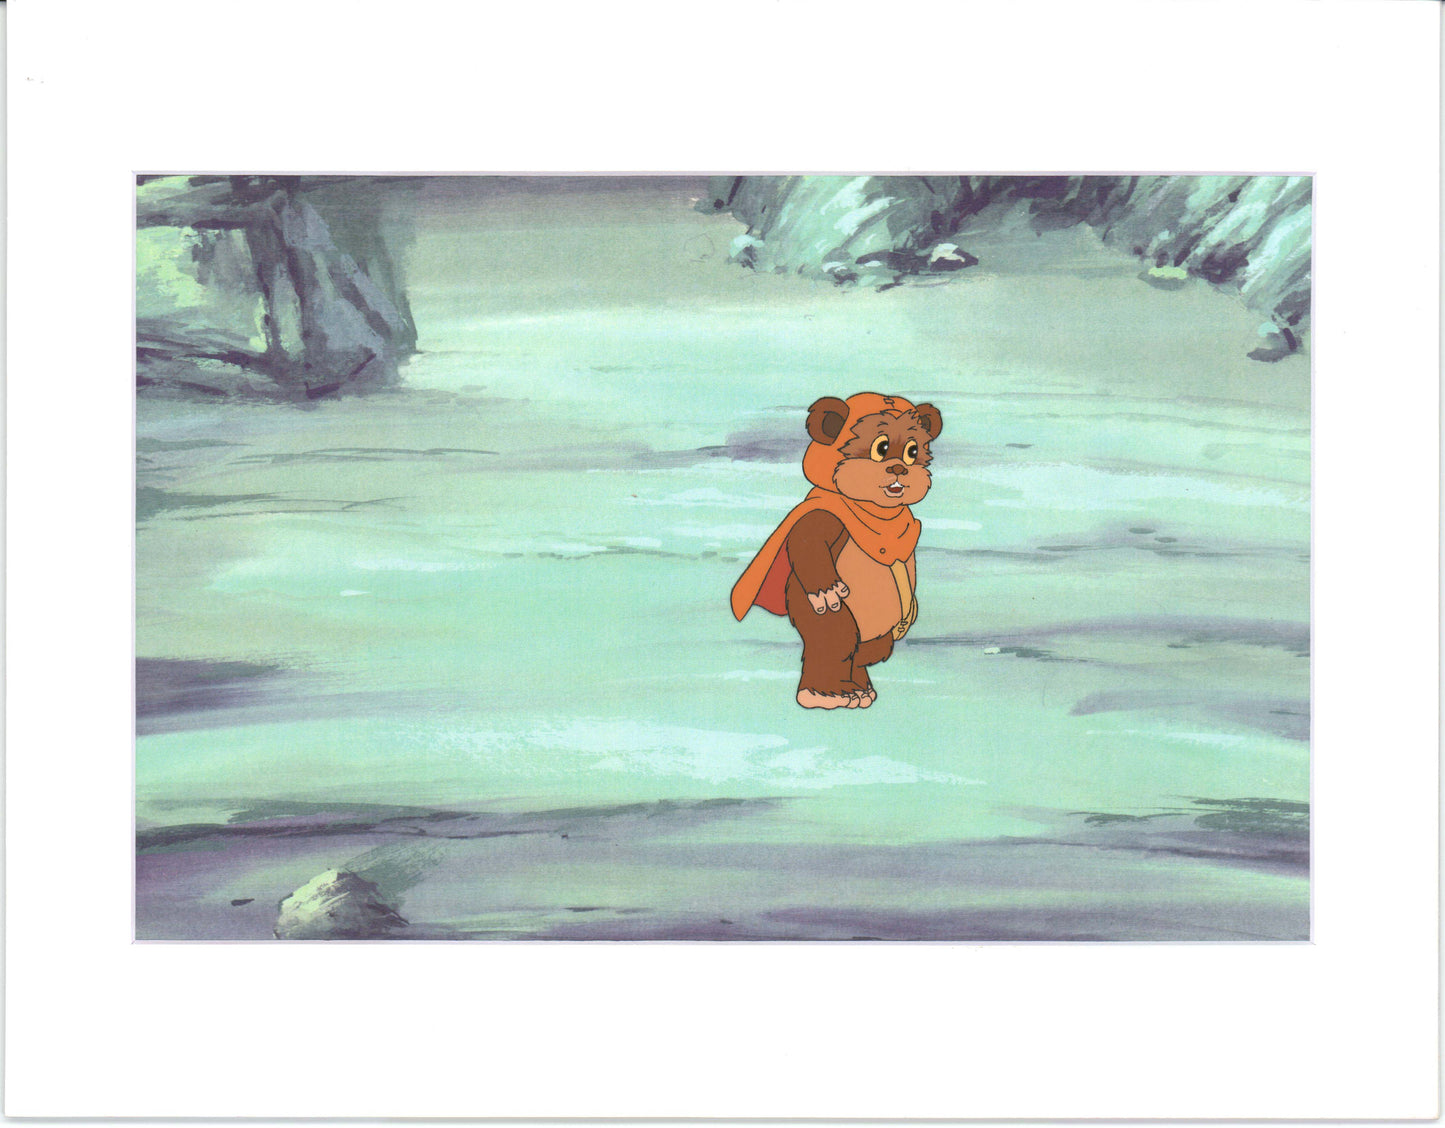 Star Wars: Ewoks Wicket from Season One Original Production Animation Cel and Drawing from Lucasfilm b5413